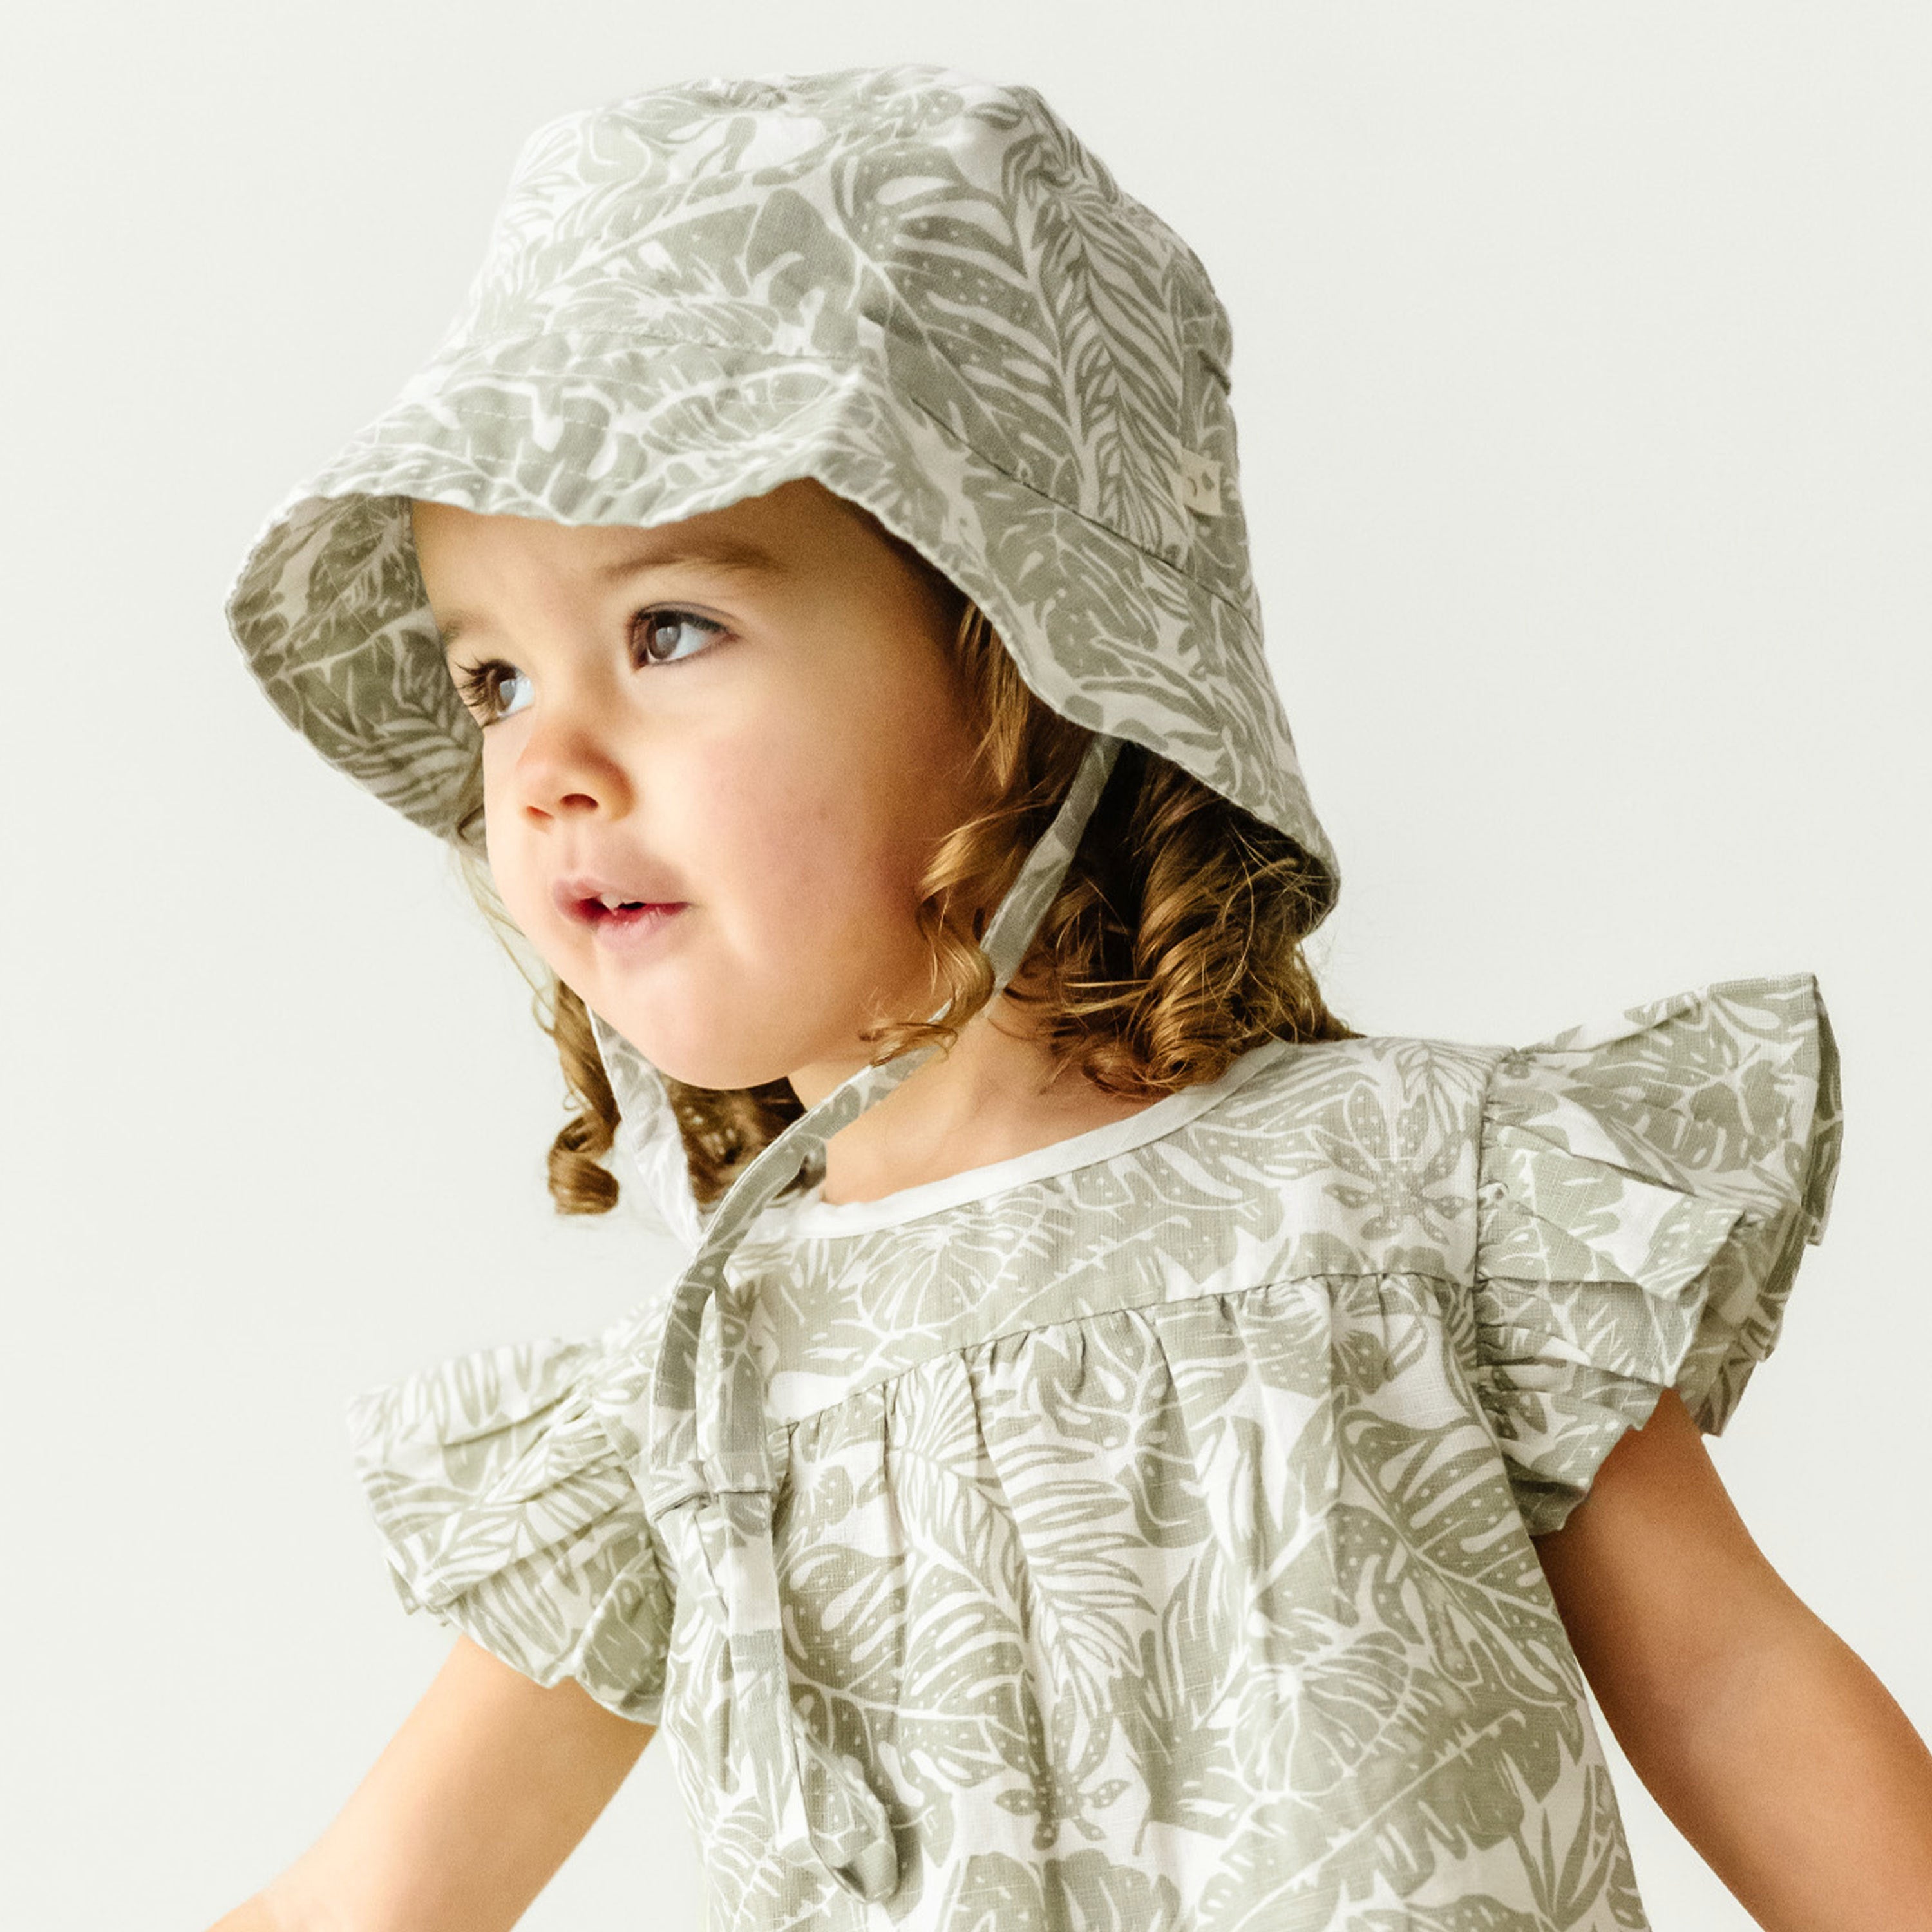 A toddler with braided hair, wearing a patterned dress and the Makemake Organics Organic Linen Bucket Sun Hat - Palms, looks to the side with a curious expression on a plain light background.